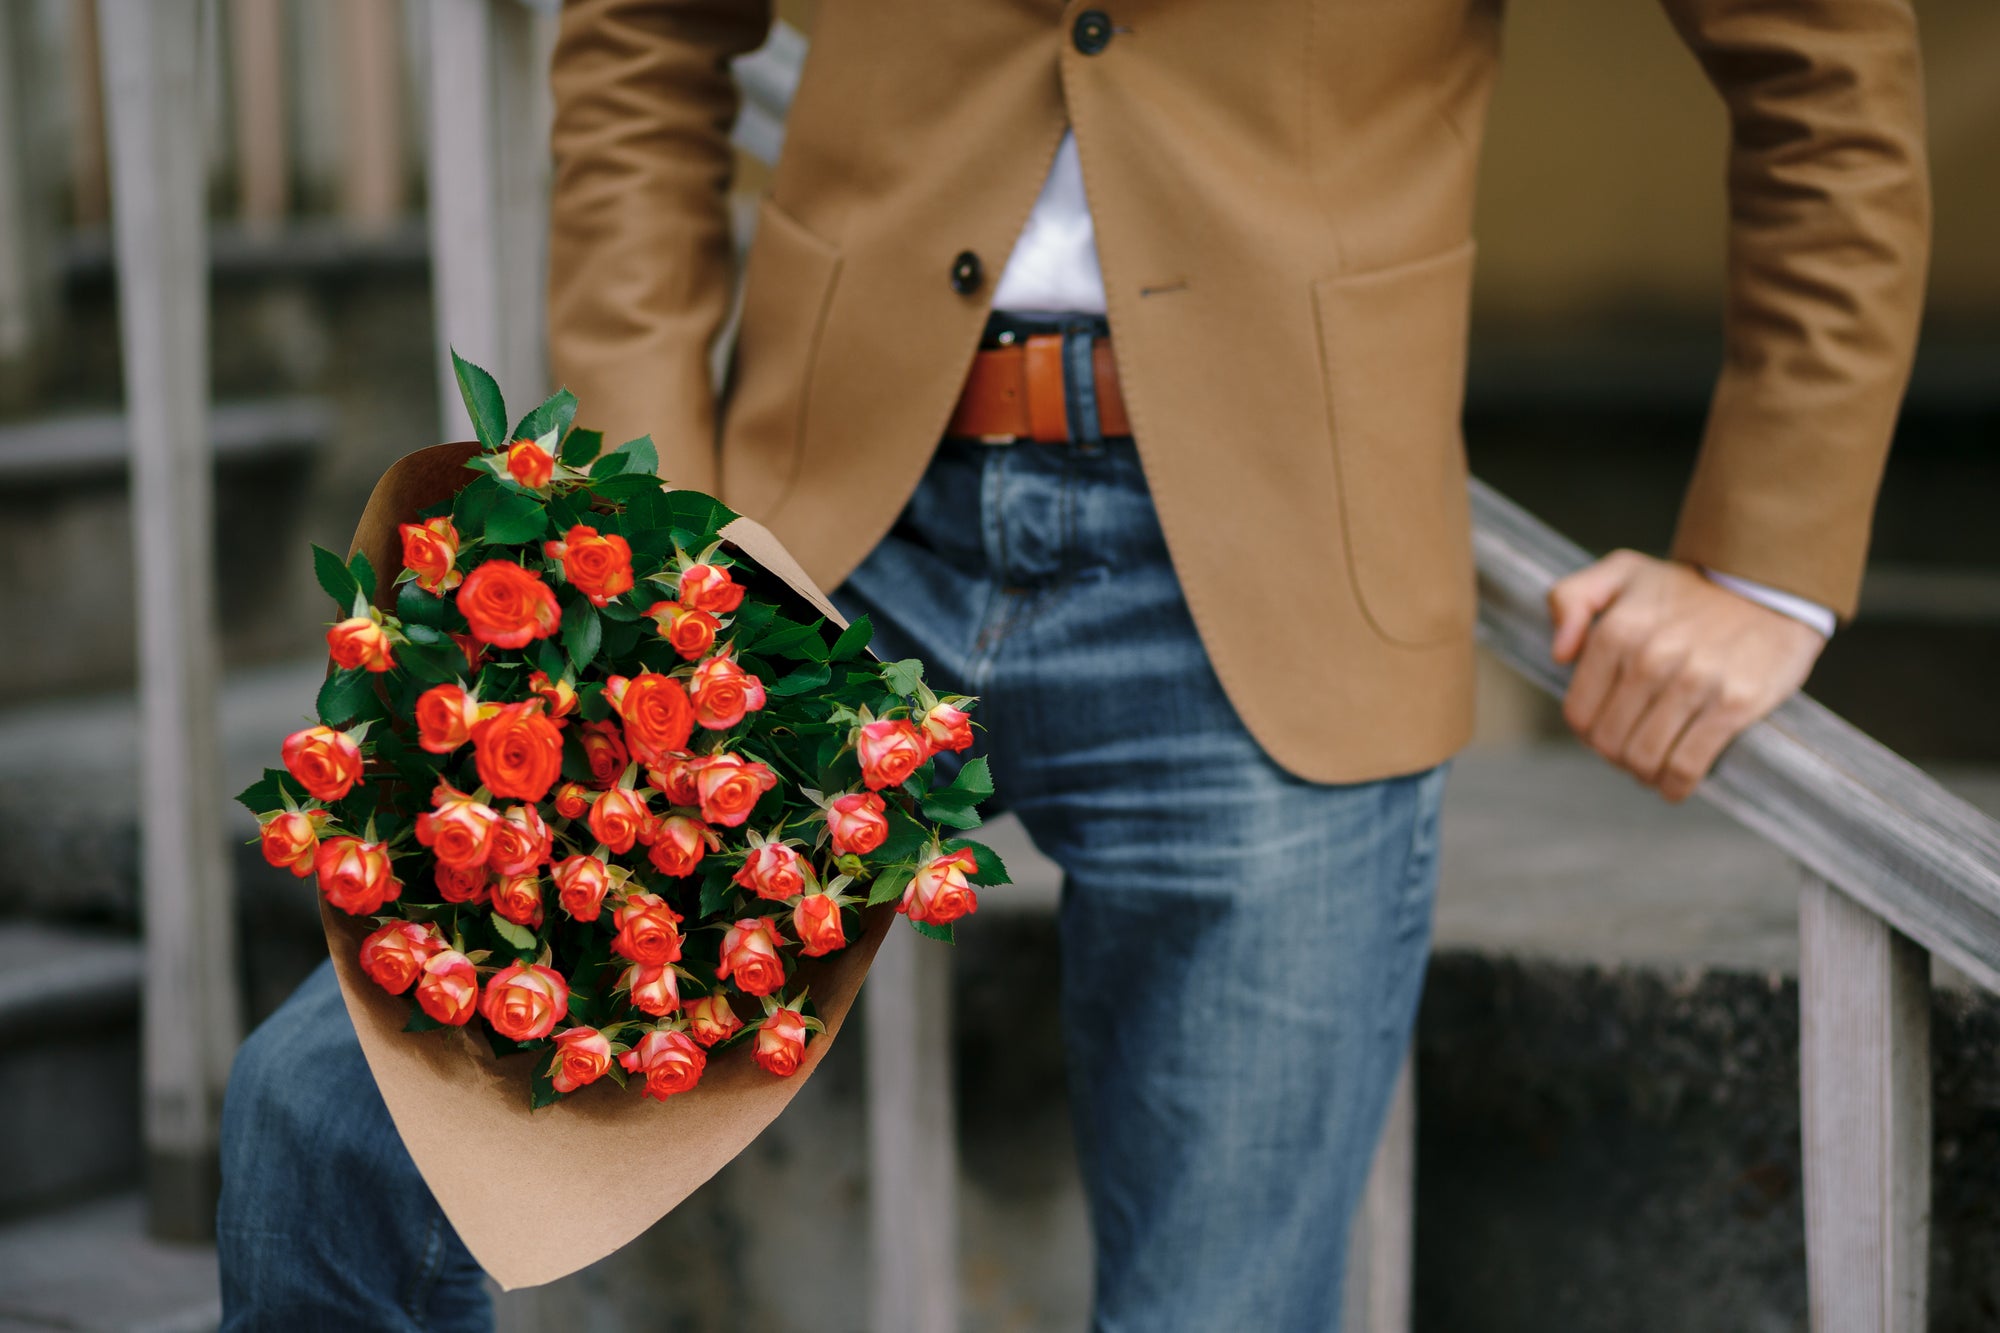 Can a Woman Send Flowers To A Man?